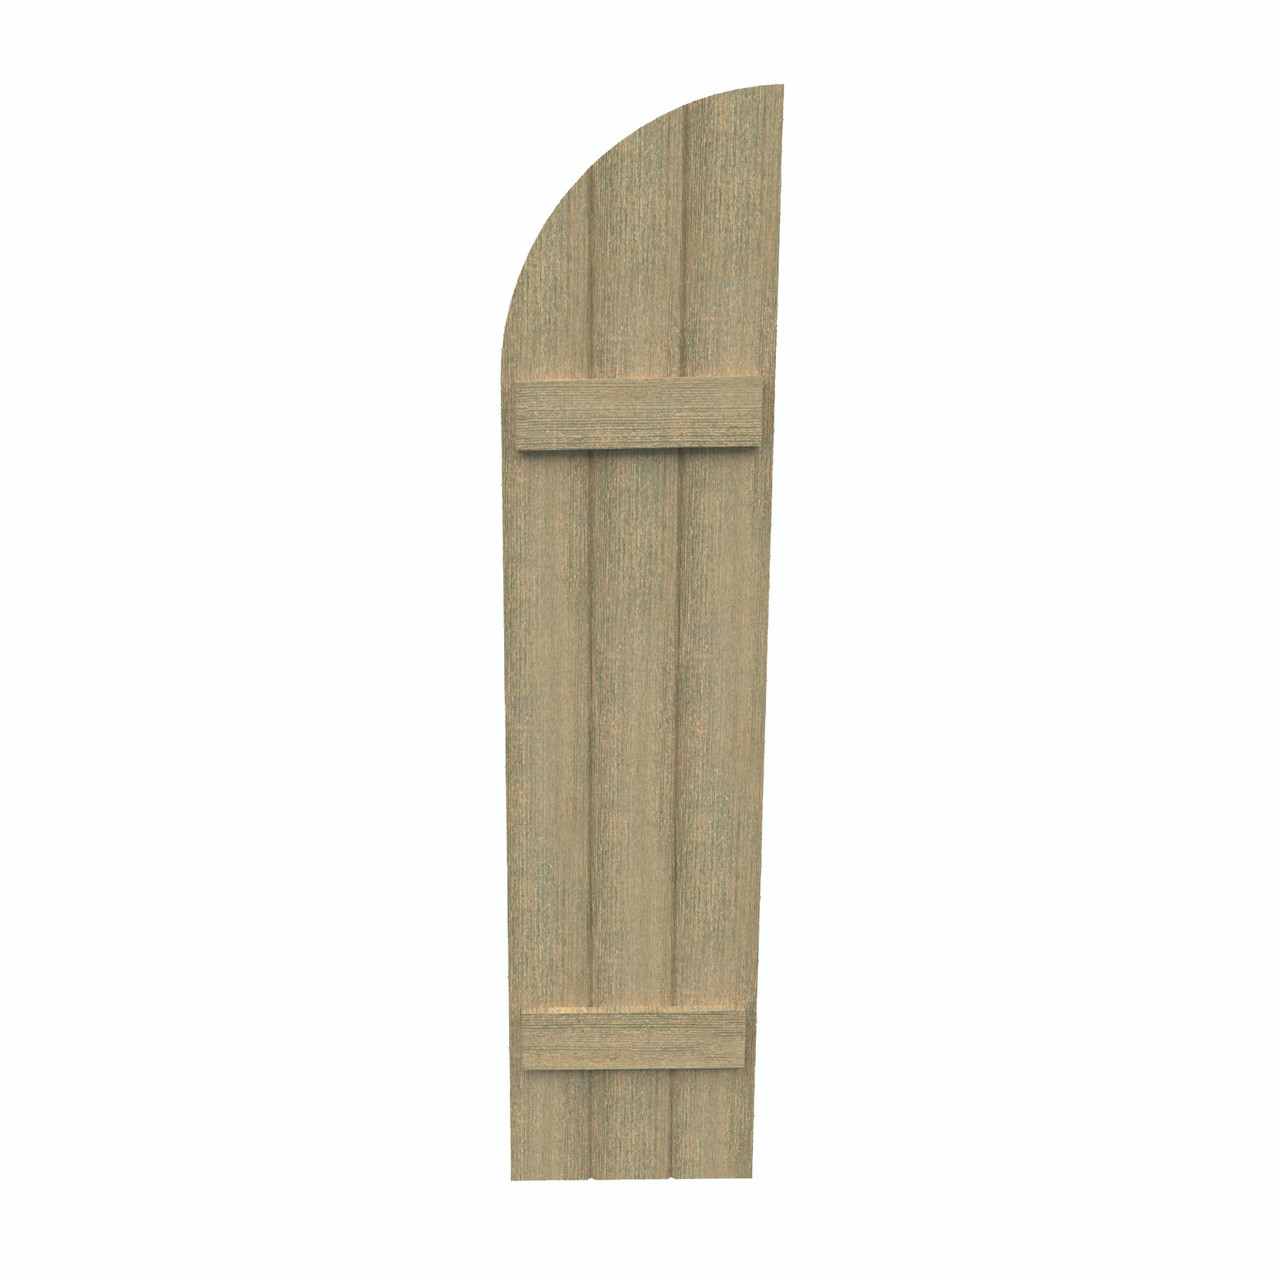 18 inch by 49 inch Quarter Round Shutter with 3-Boards